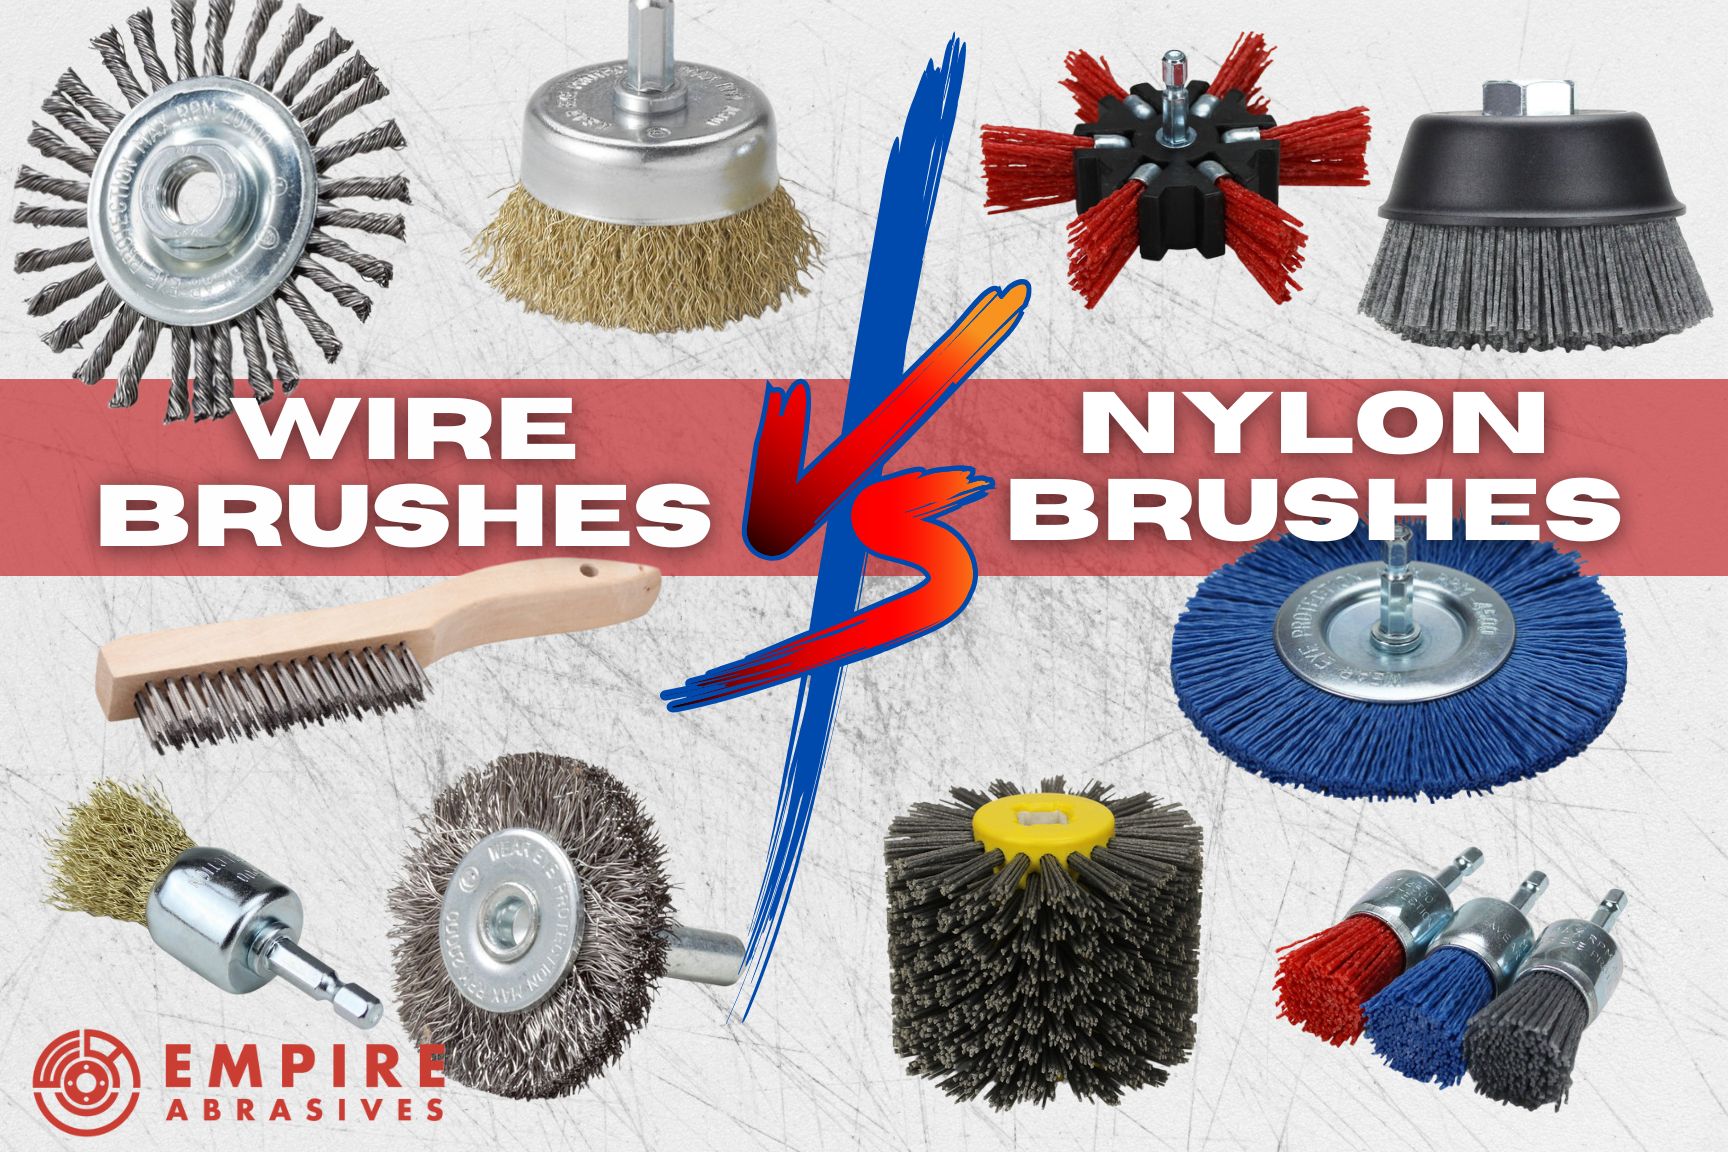 Header image depicting a comparison between Wire Brushes and Nylon Brushes, showing a variety of brush types including wire wheel, wire cup brush, wire end brush, handheld wire brush on one side and nylon cup brush, nylon brush drum, nylon end brushes, nylon wire wheel, and Nylon Wire Strip Flap Brush on the other.